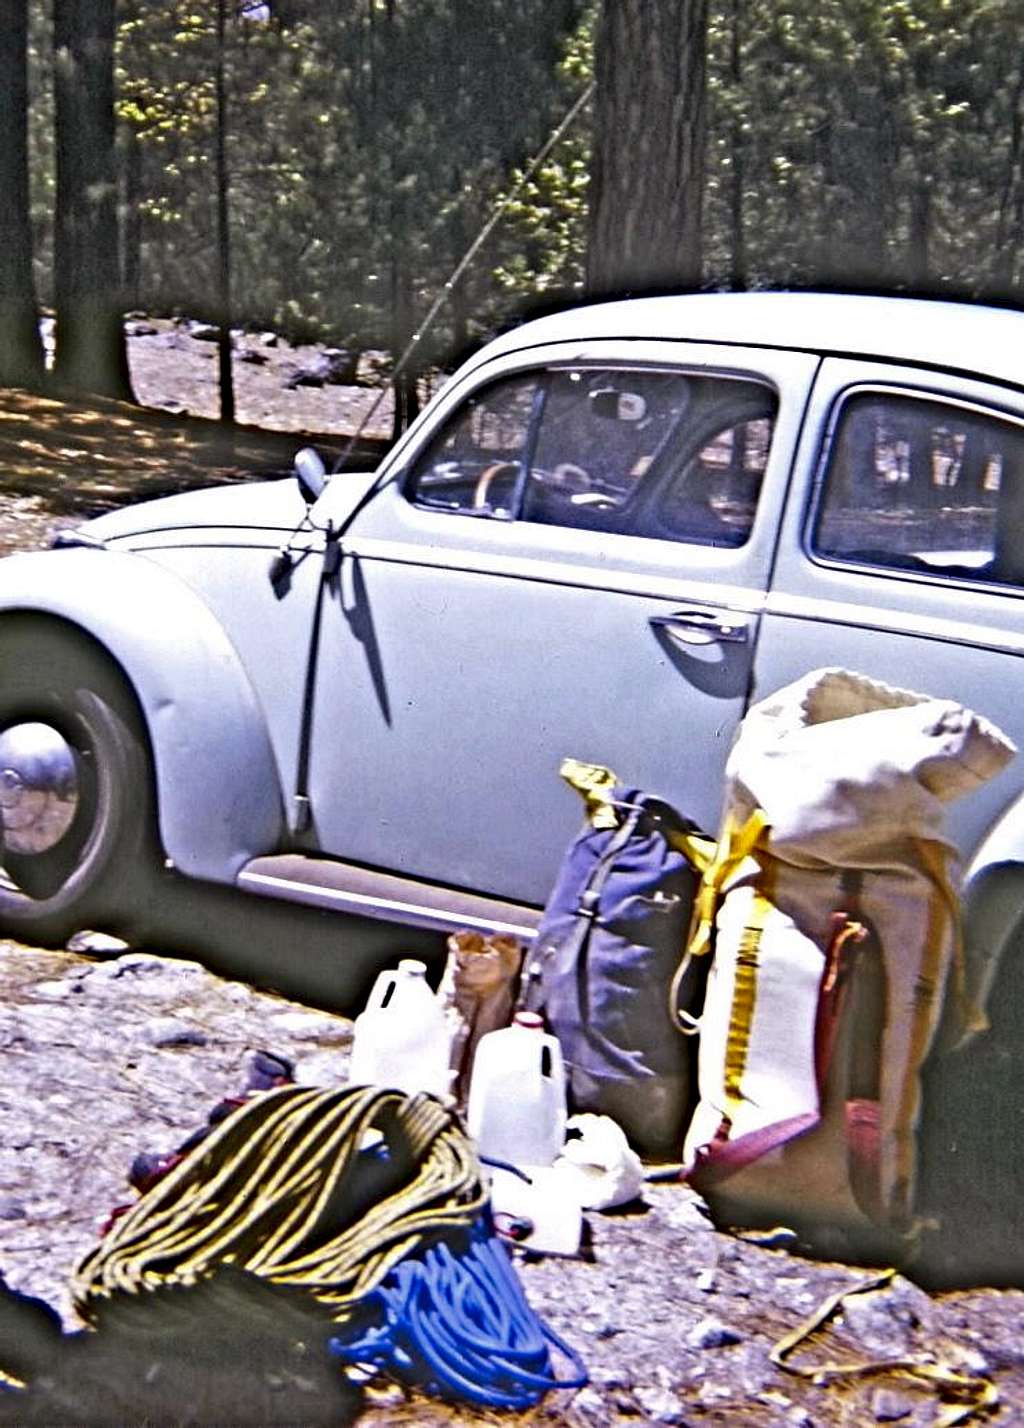 Packing My Haul Bag in Yosemite, early 1970s